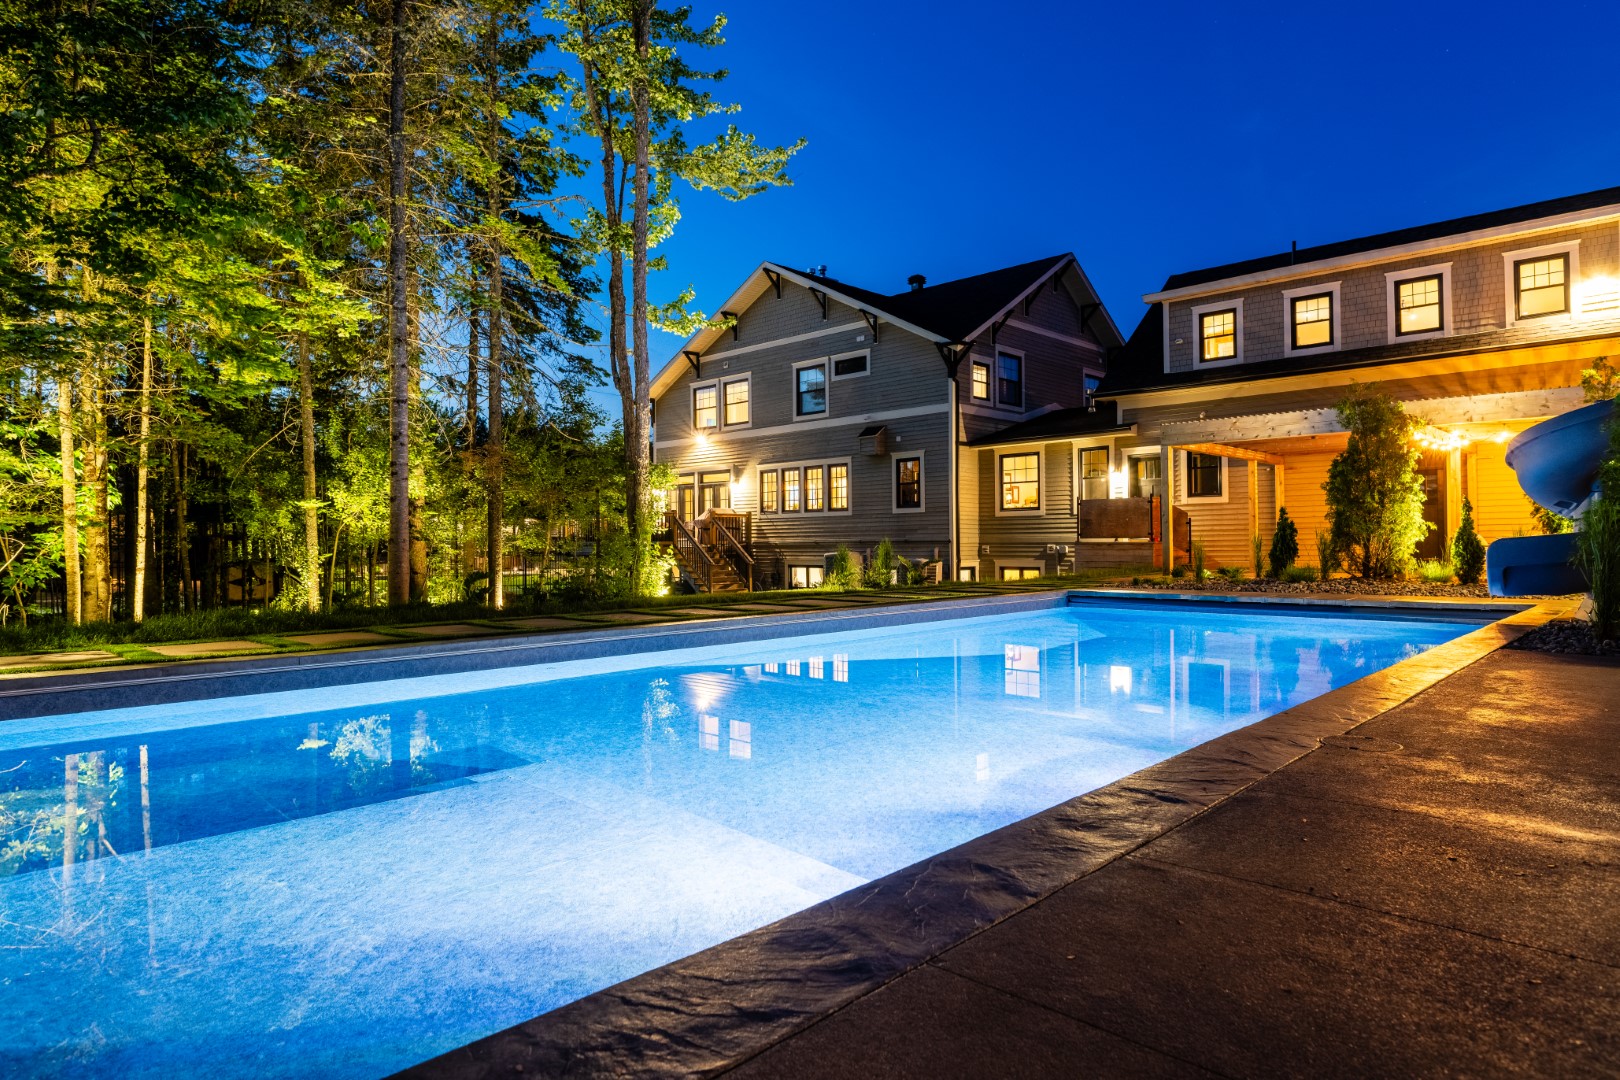 Pool with underwater lighting at Moncton residence showing installation at night